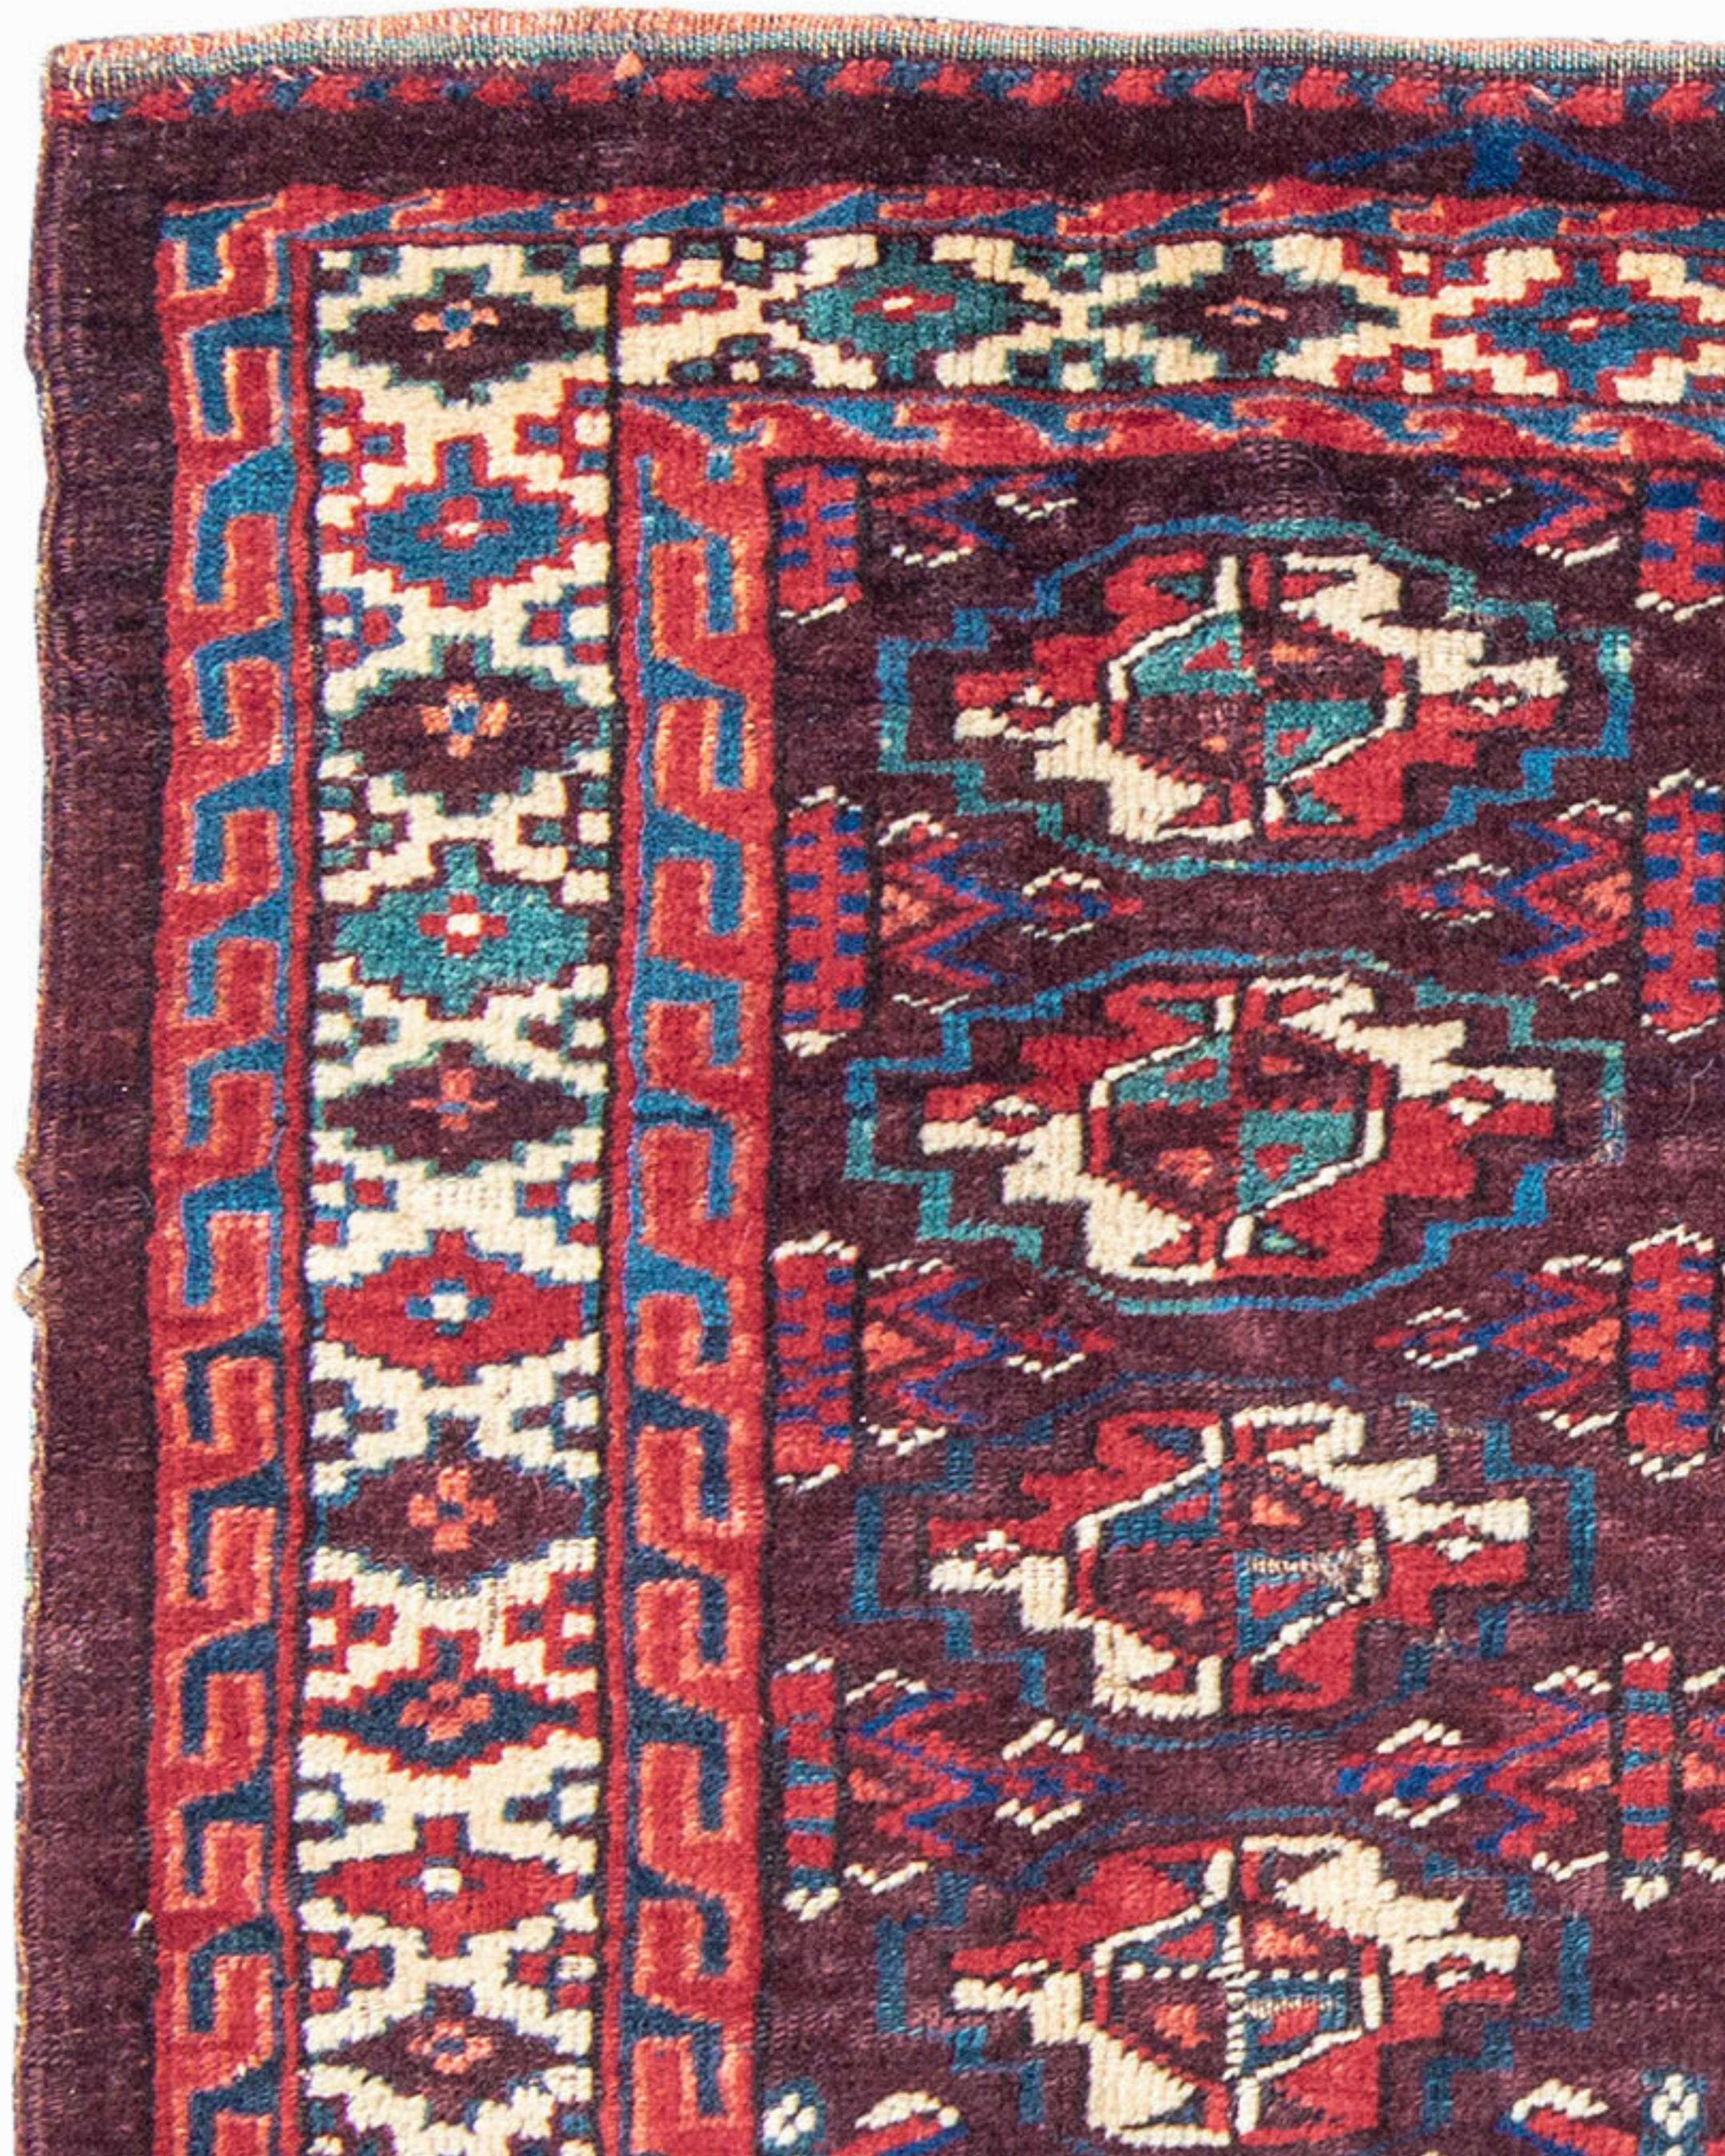 Hand-Woven Antique Turkmen Yomut Chuval Rug, 19th Century For Sale